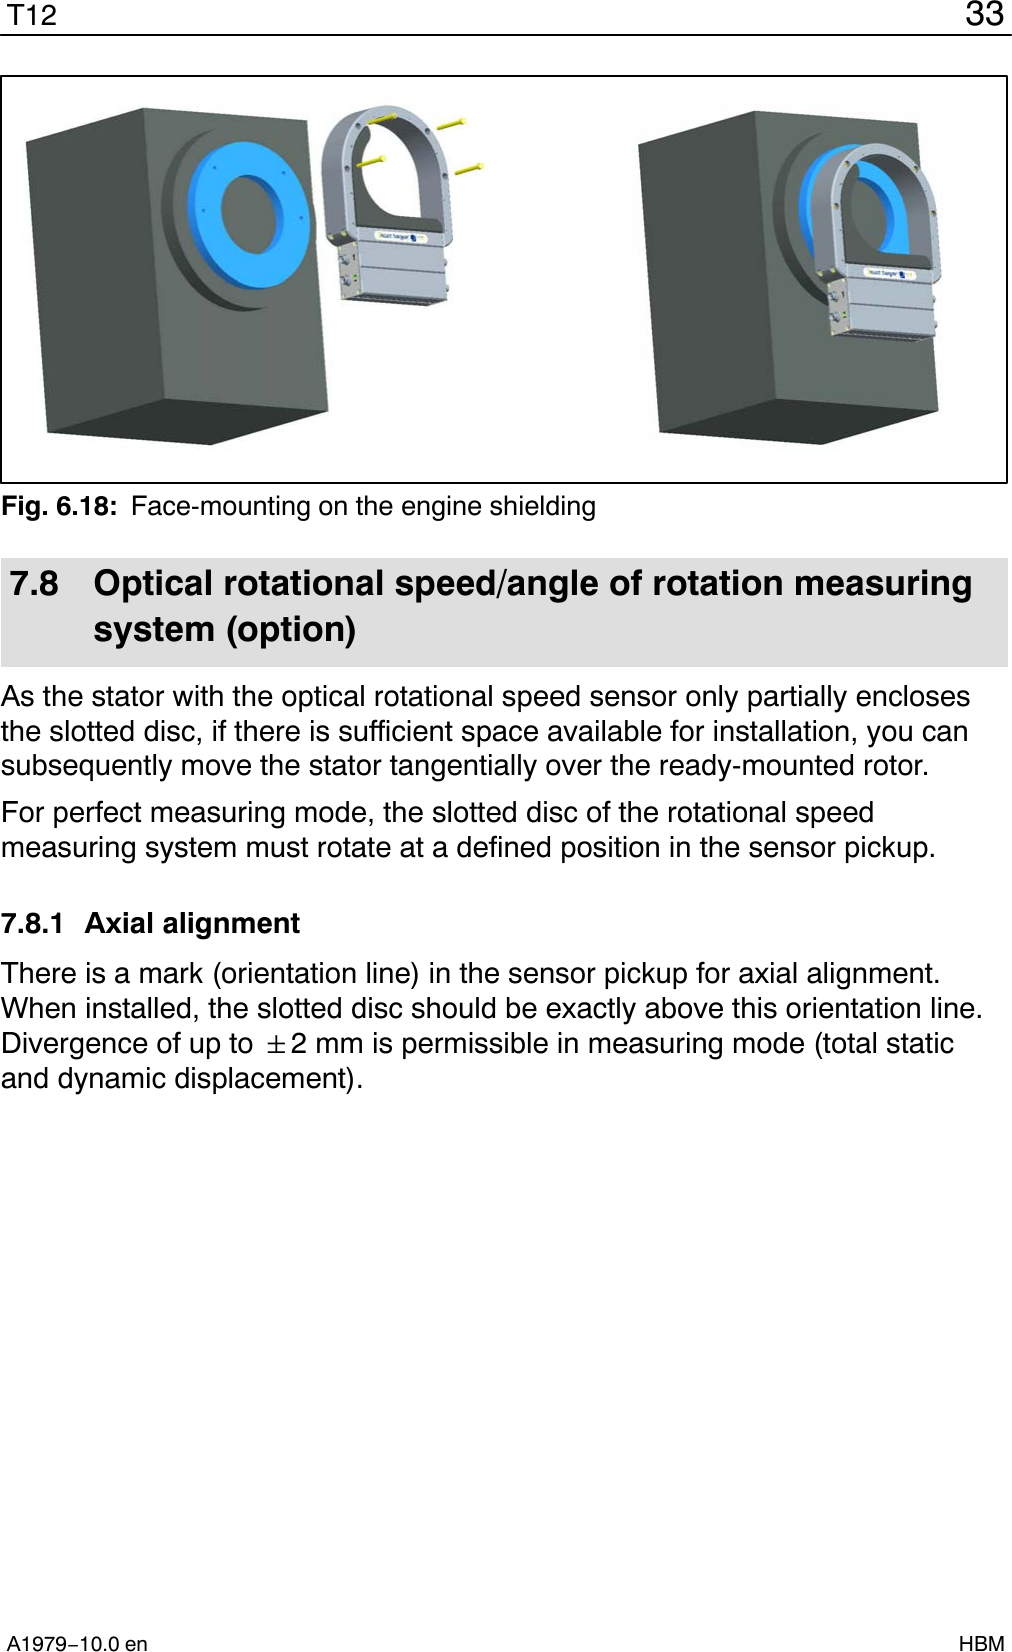 33T12A1979−10.0 en HBMFig. 6.18: Face-mounting on the engine shielding7.8 Optical rotational speed/angle of rotation measuringsystem (option)As the stator with the optical rotational speed sensor only partially enclosesthe slotted disc, if there is sufficient space available for installation, you cansubsequently move the stator tangentially over the ready-mounted rotor.For perfect measuring mode, the slotted disc of the rotational speedmeasuring system must rotate at a defined position in the sensor pickup.7.8.1 Axial alignmentThere is a mark (orientation line) in the sensor pickup for axial alignment.When installed, the slotted disc should be exactly above this orientation line.Divergence of up to &quot;2 mm is permissible in measuring mode (total staticand dynamic displacement).